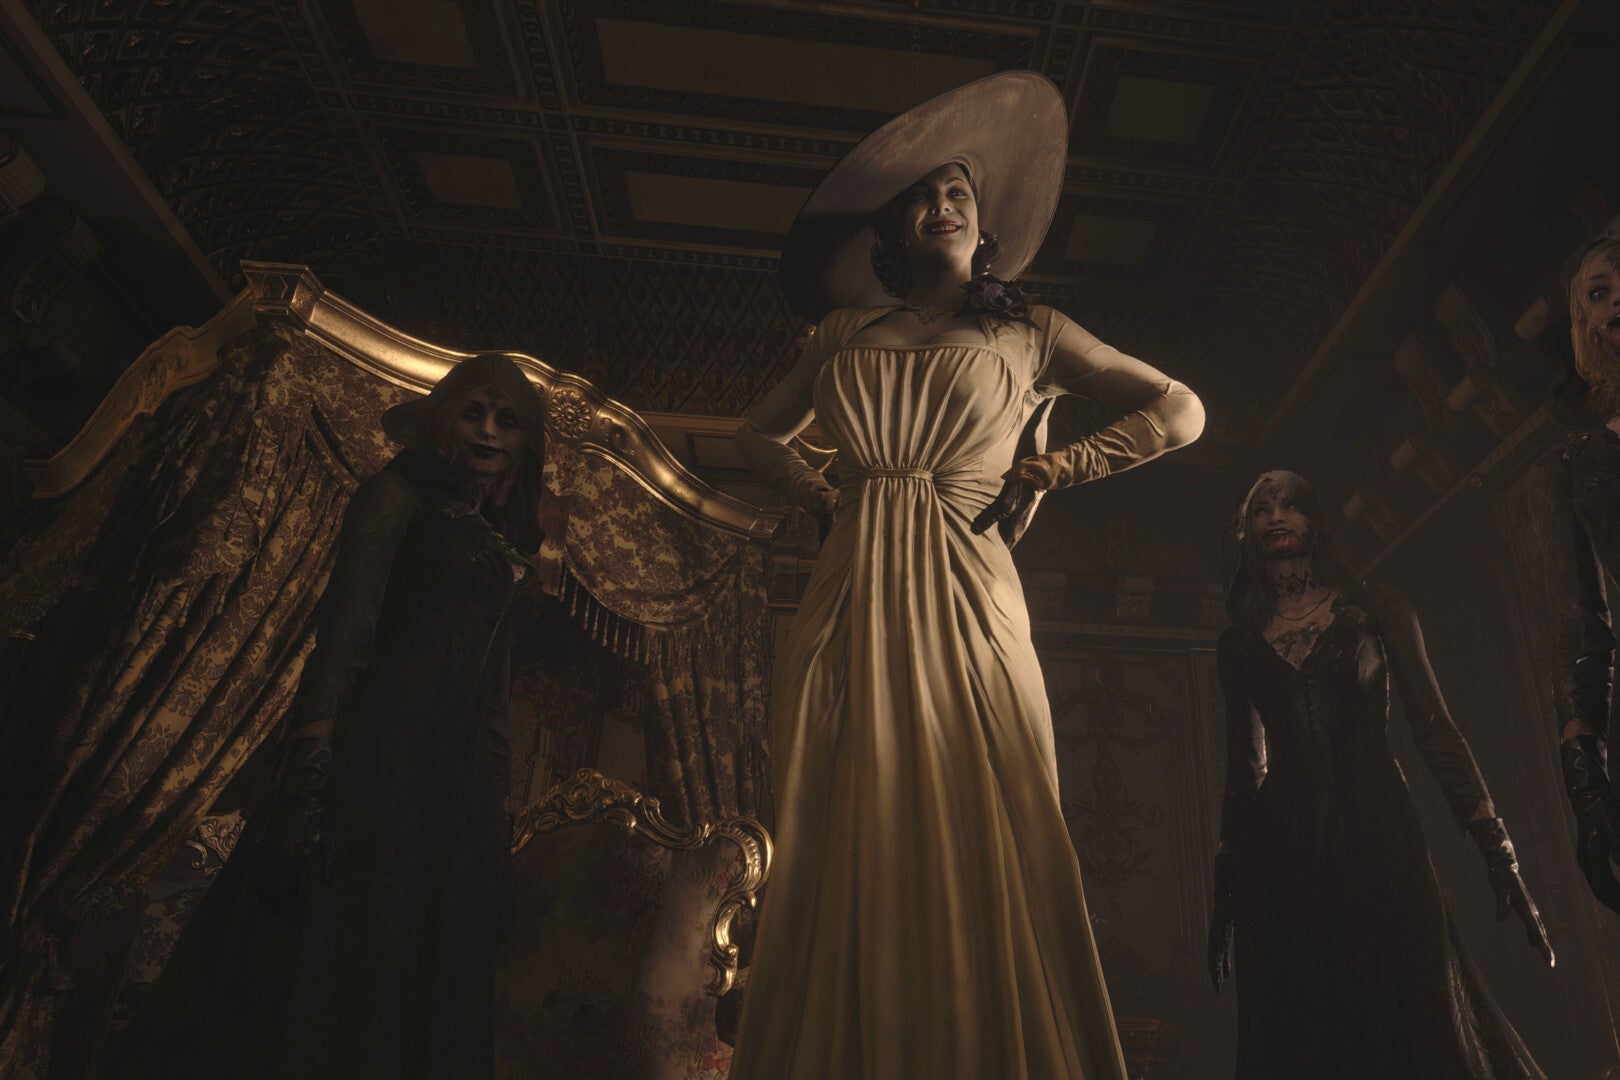 A tall woman with a floppy hat and a white dress stands among a crowd of zombies. They are all washed in a sepia tone. 